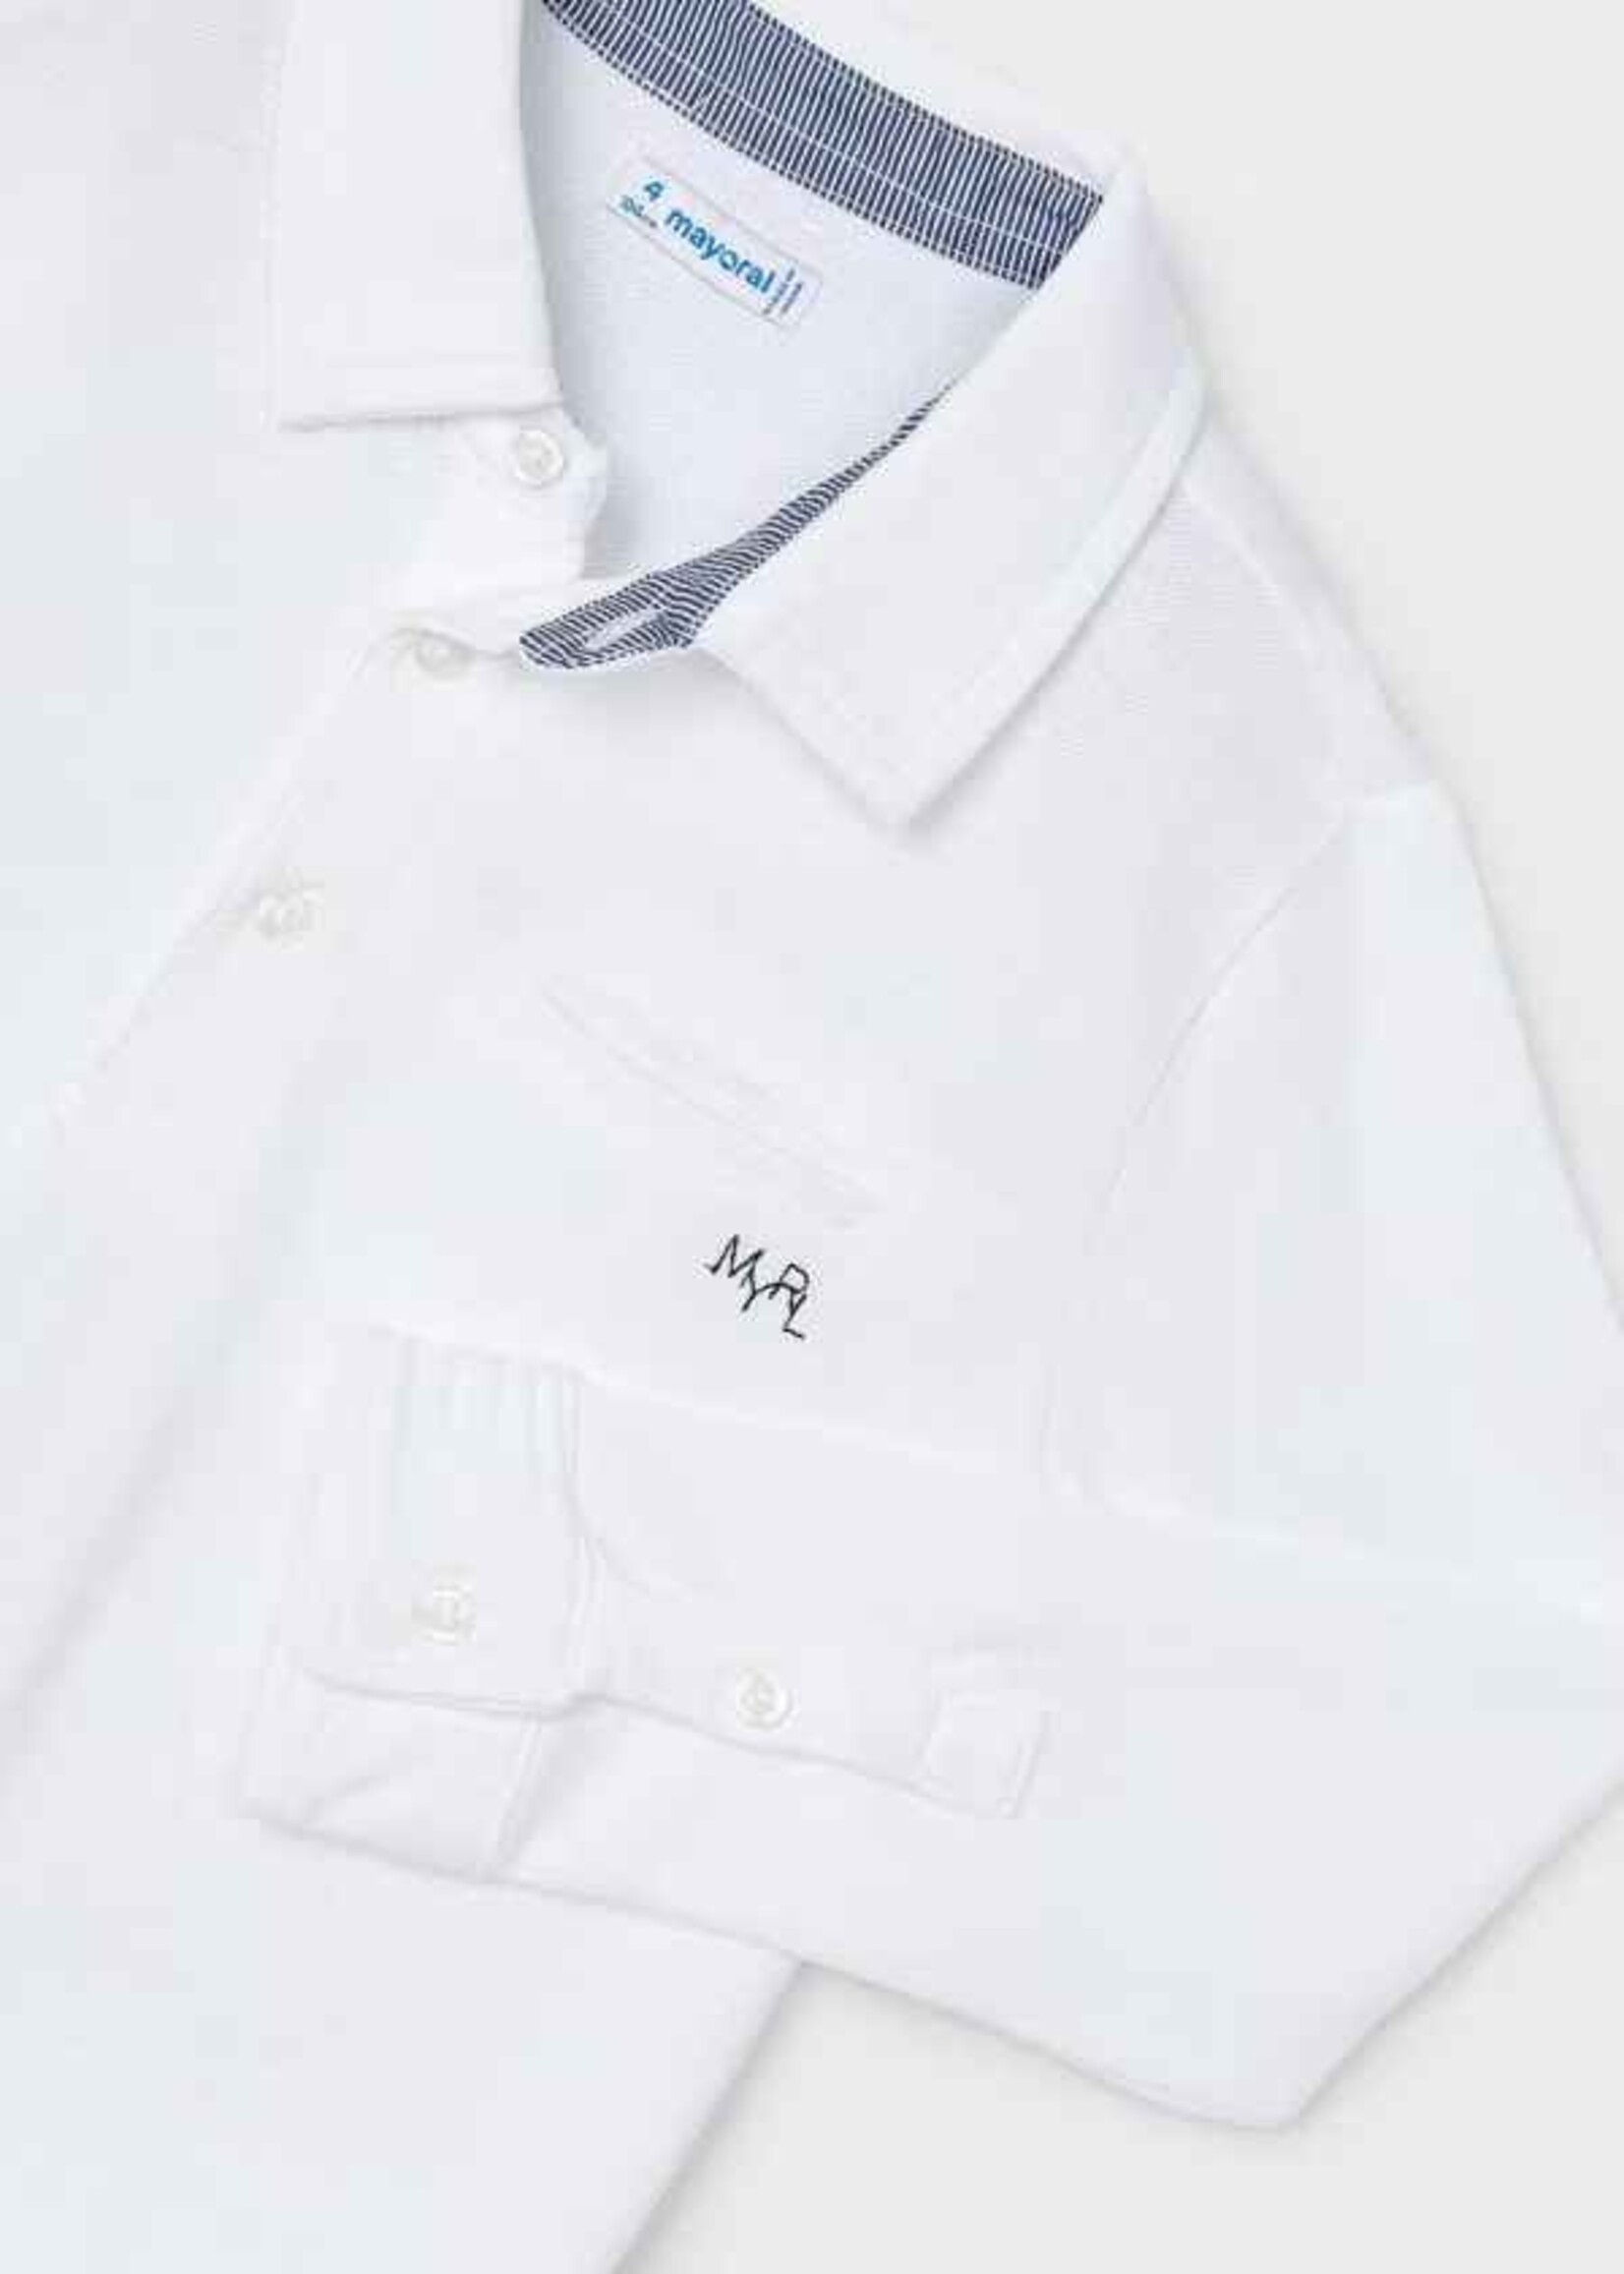 Mayoral Mayoral L/s polo wit - 24 03111